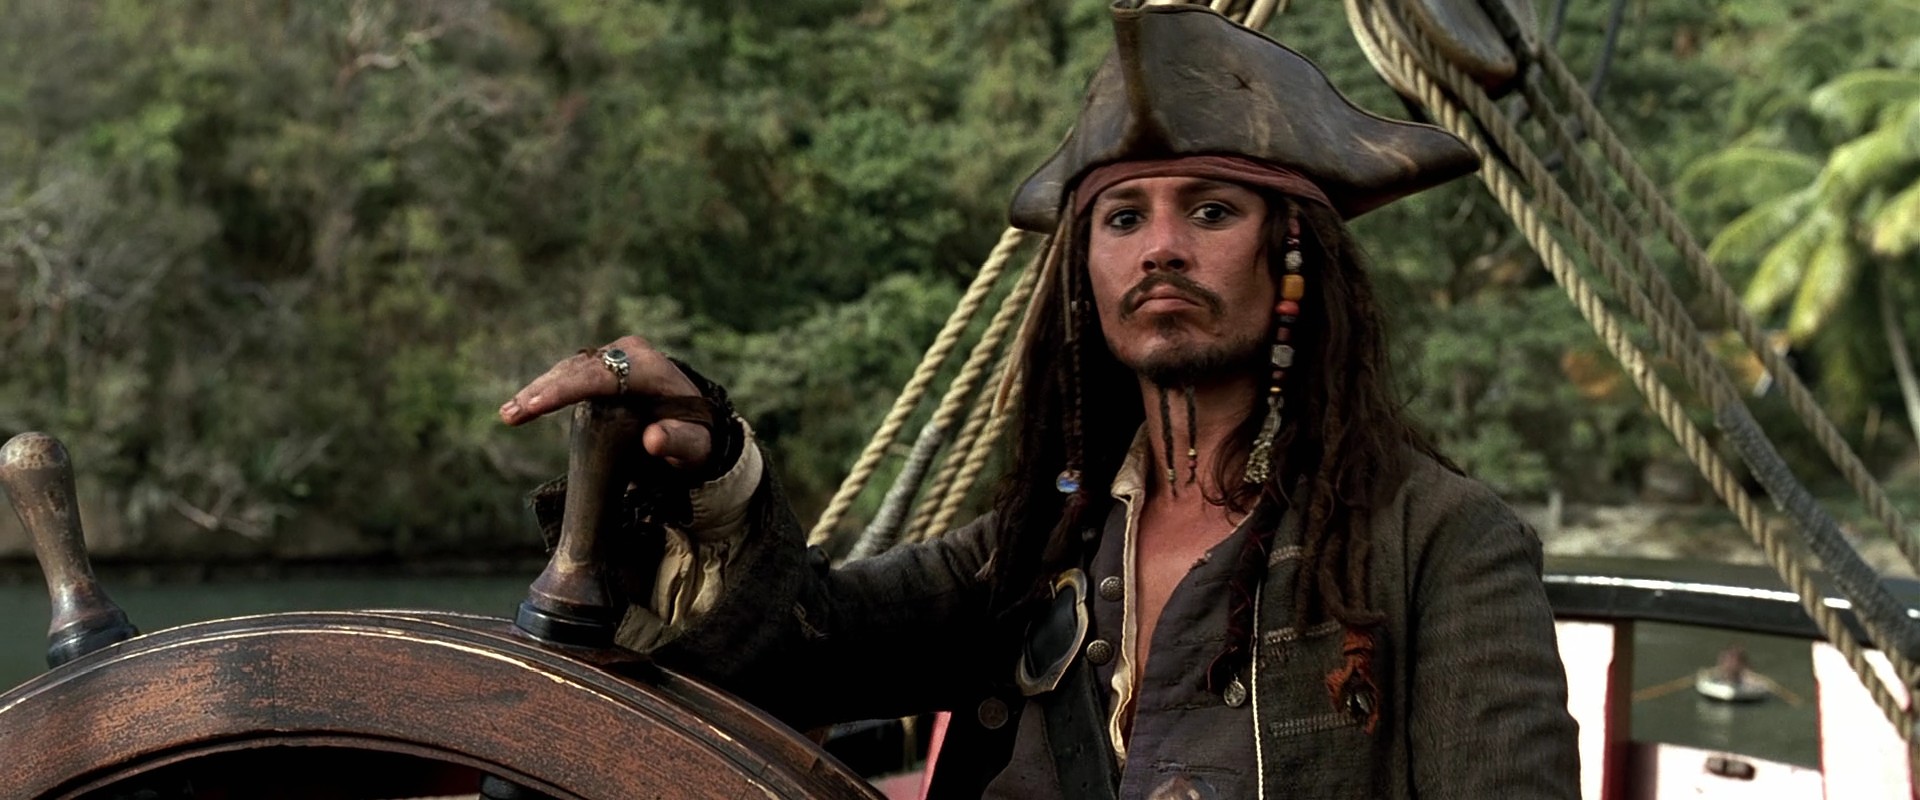 Hq Pirates Of The Caribbean - Pirates Of The Caribbean Jack Sparrow Steering - HD Wallpaper 